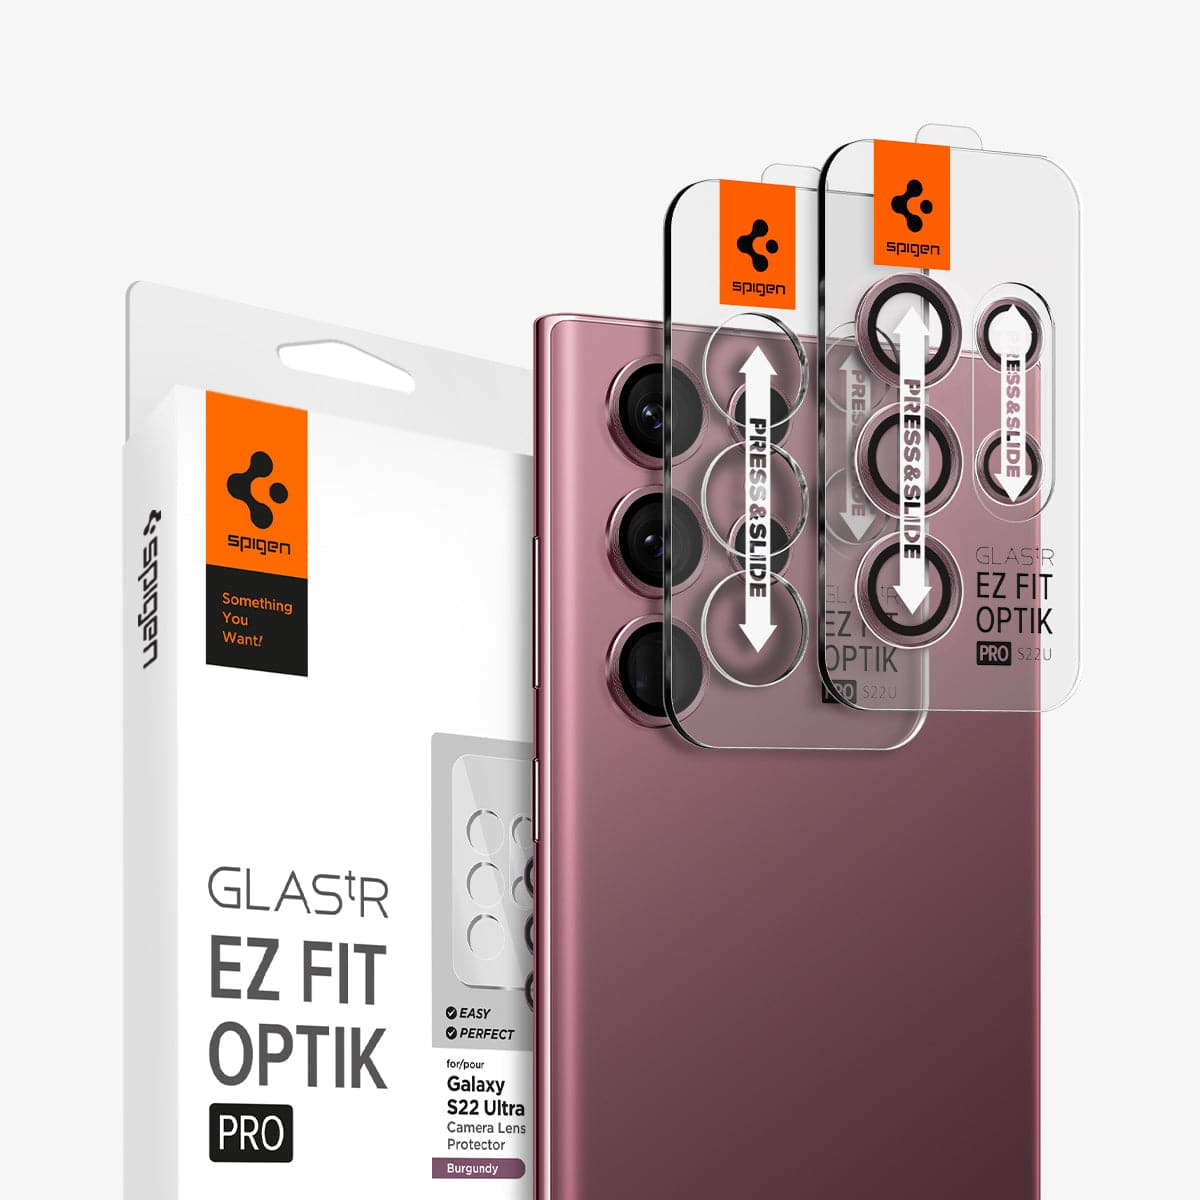 AGL04752 - Galaxy S22 Ultra EZ Fit Optik Pro Lens Protector Glass.tR in burgundy showing the device, two ez fit lens protectors and packaging